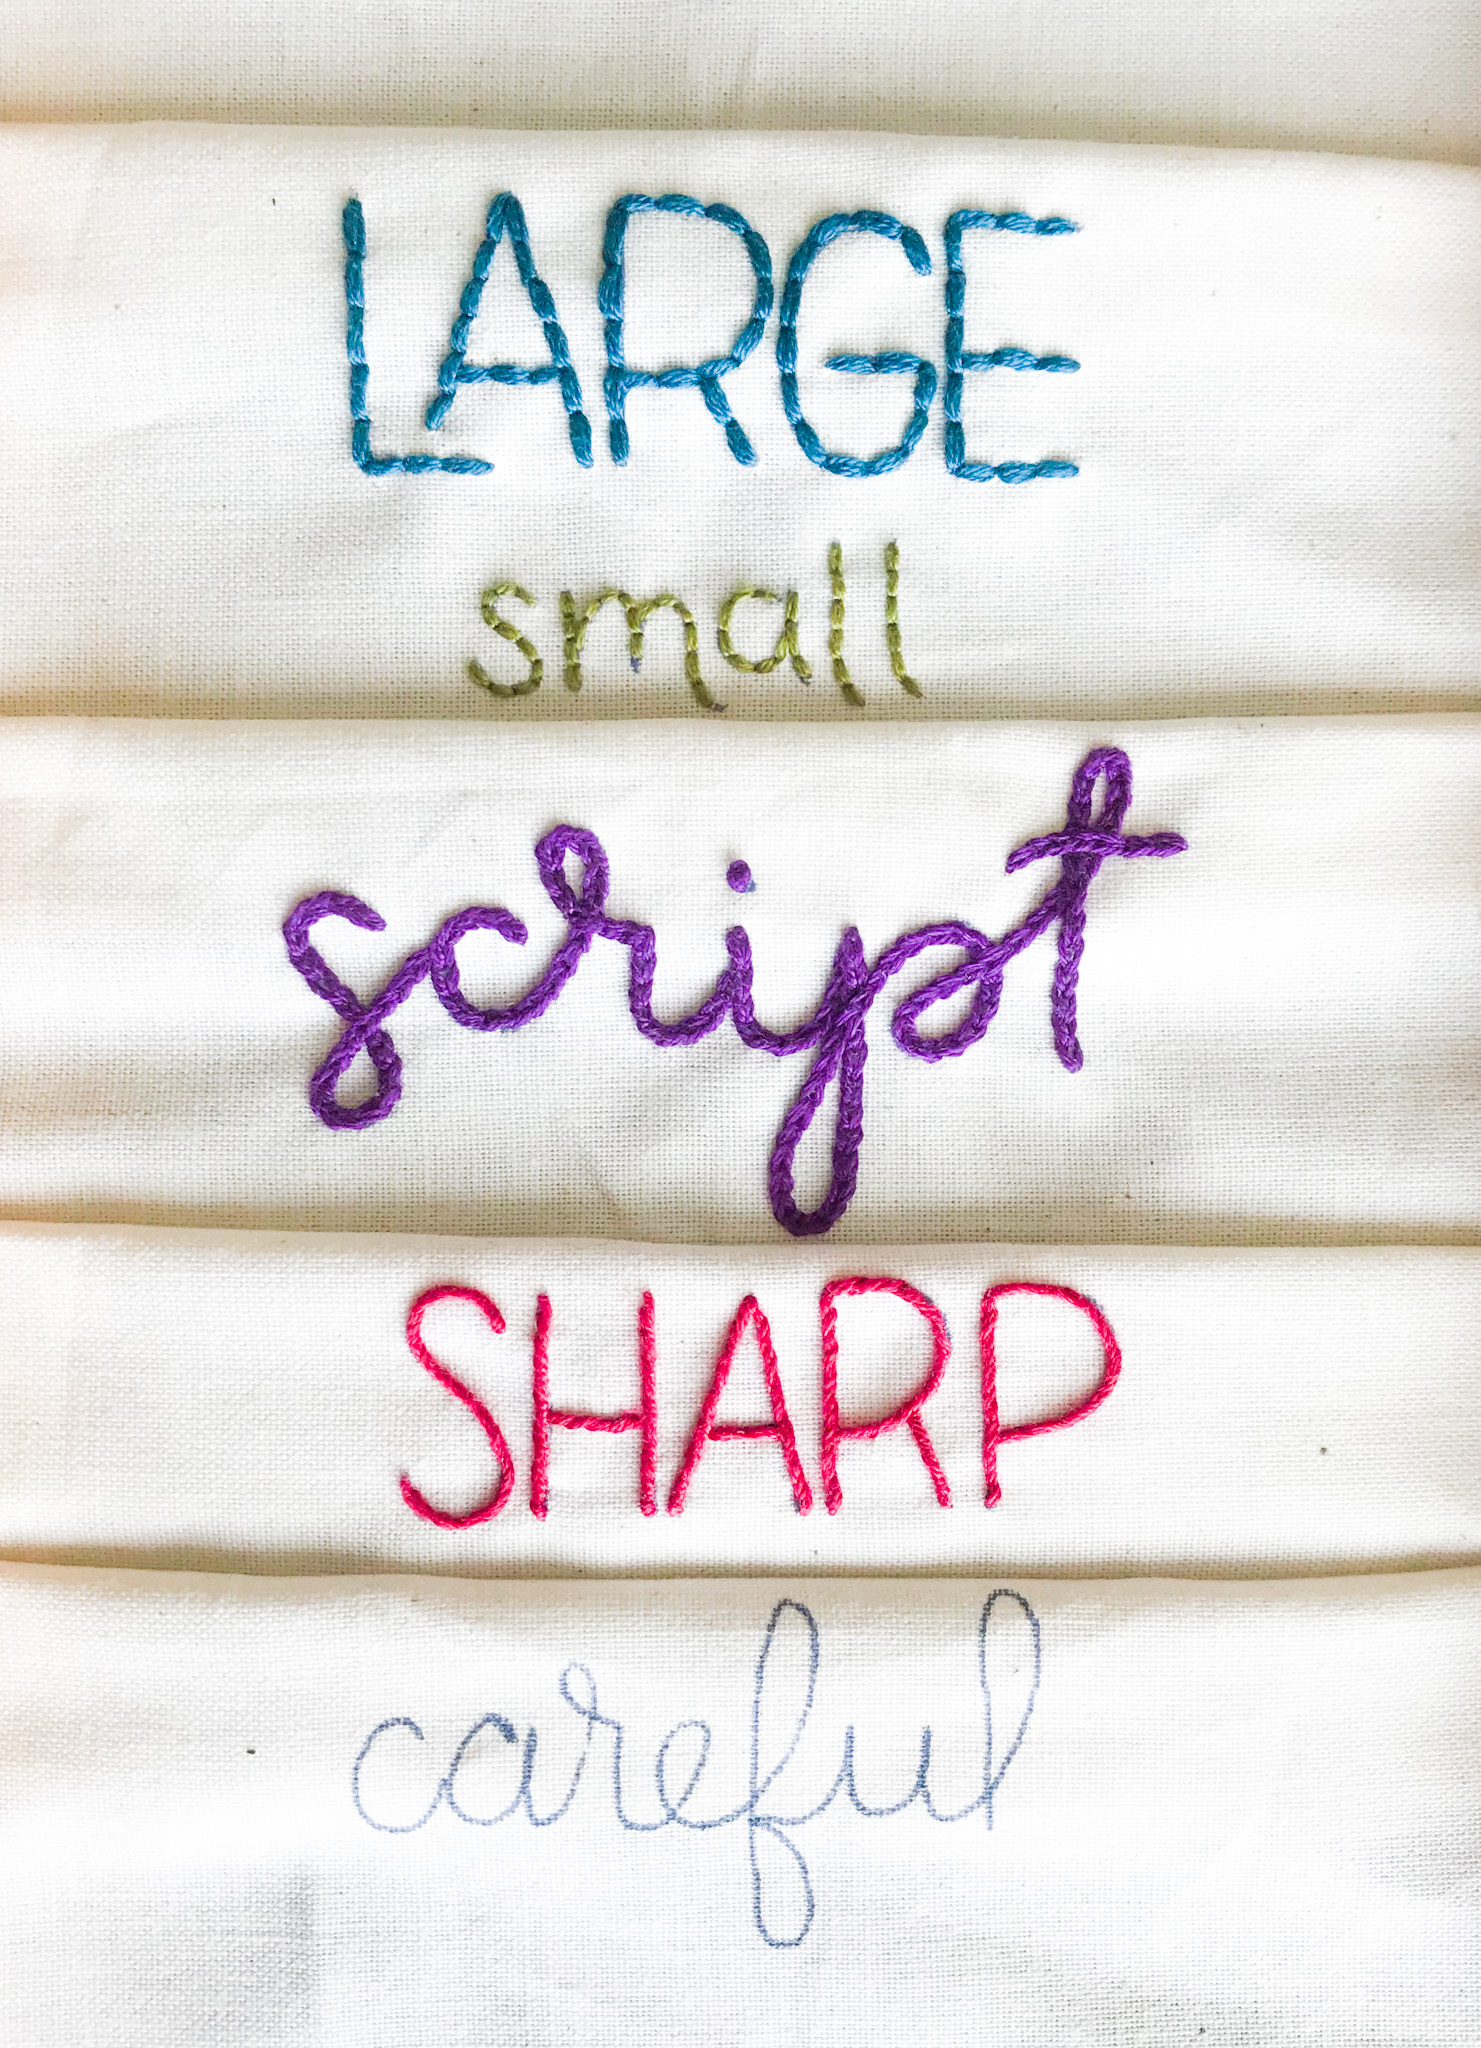 The words "Large, small, script, sharp, and carful" stitched in different styles.